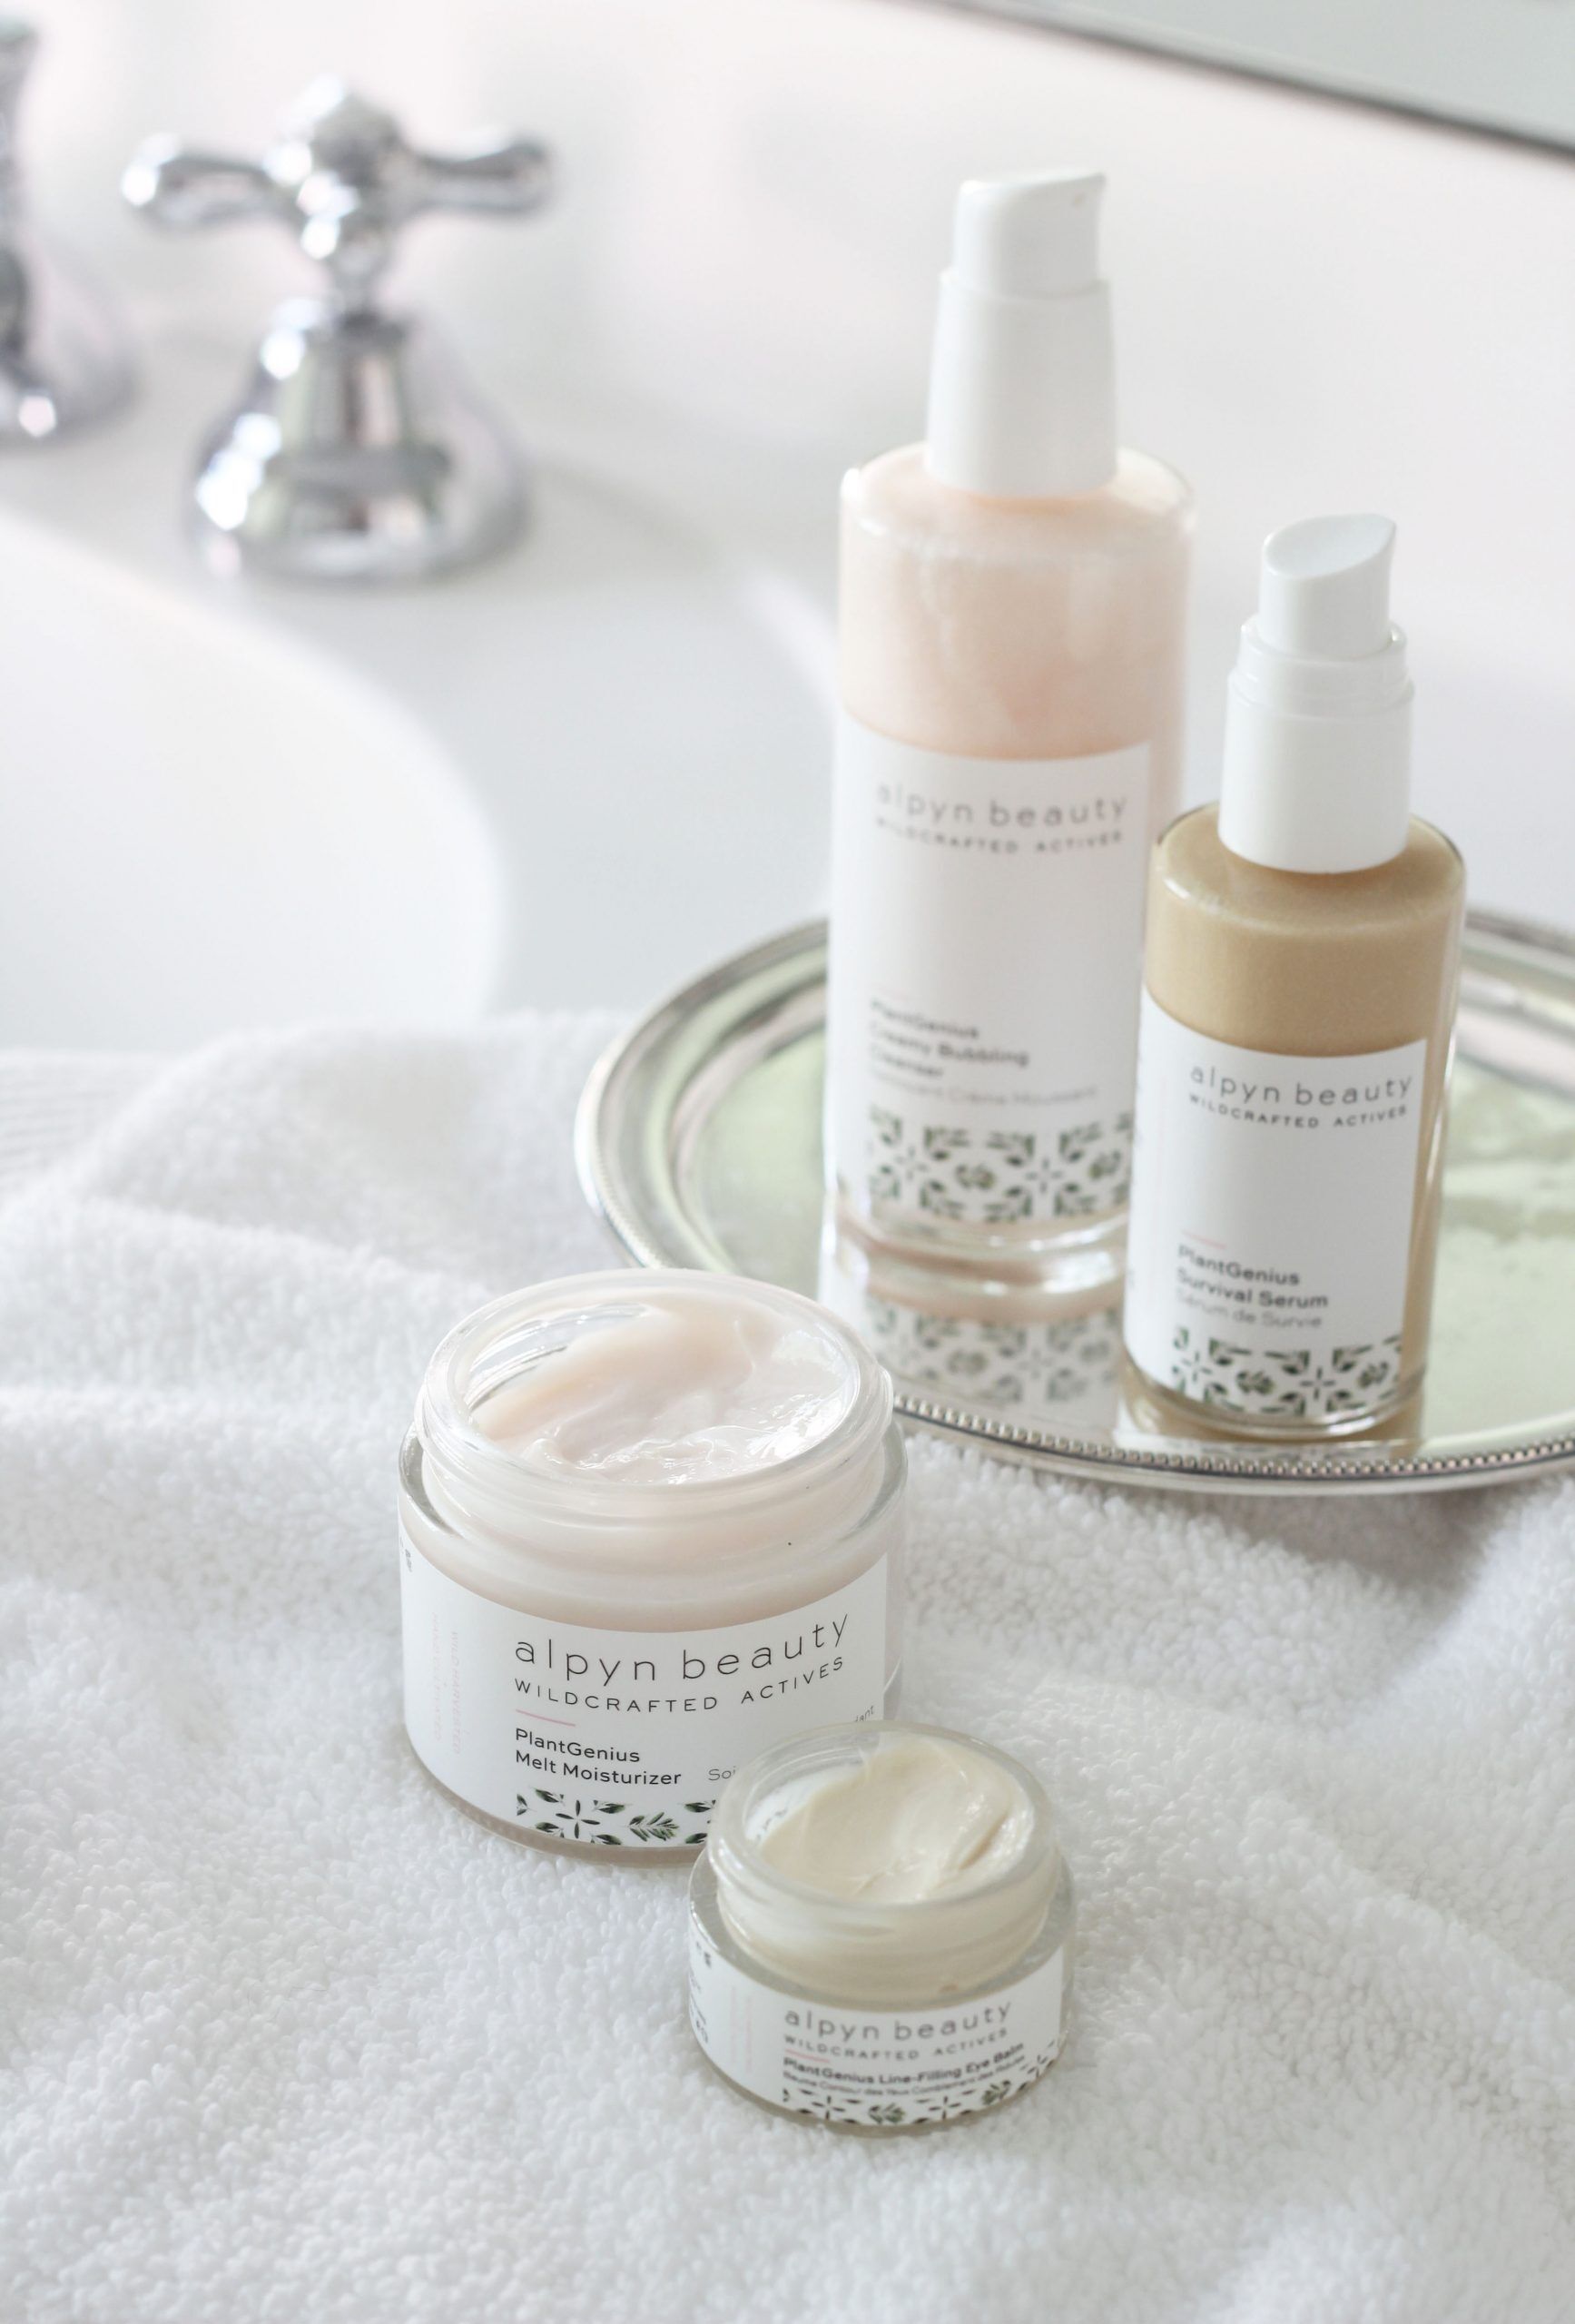 Treat your skin to them best clean beauty products from Alpyn Beauty! Includes a cleanser, serum, moisturizer and eye-balm that will have your skin glowing!